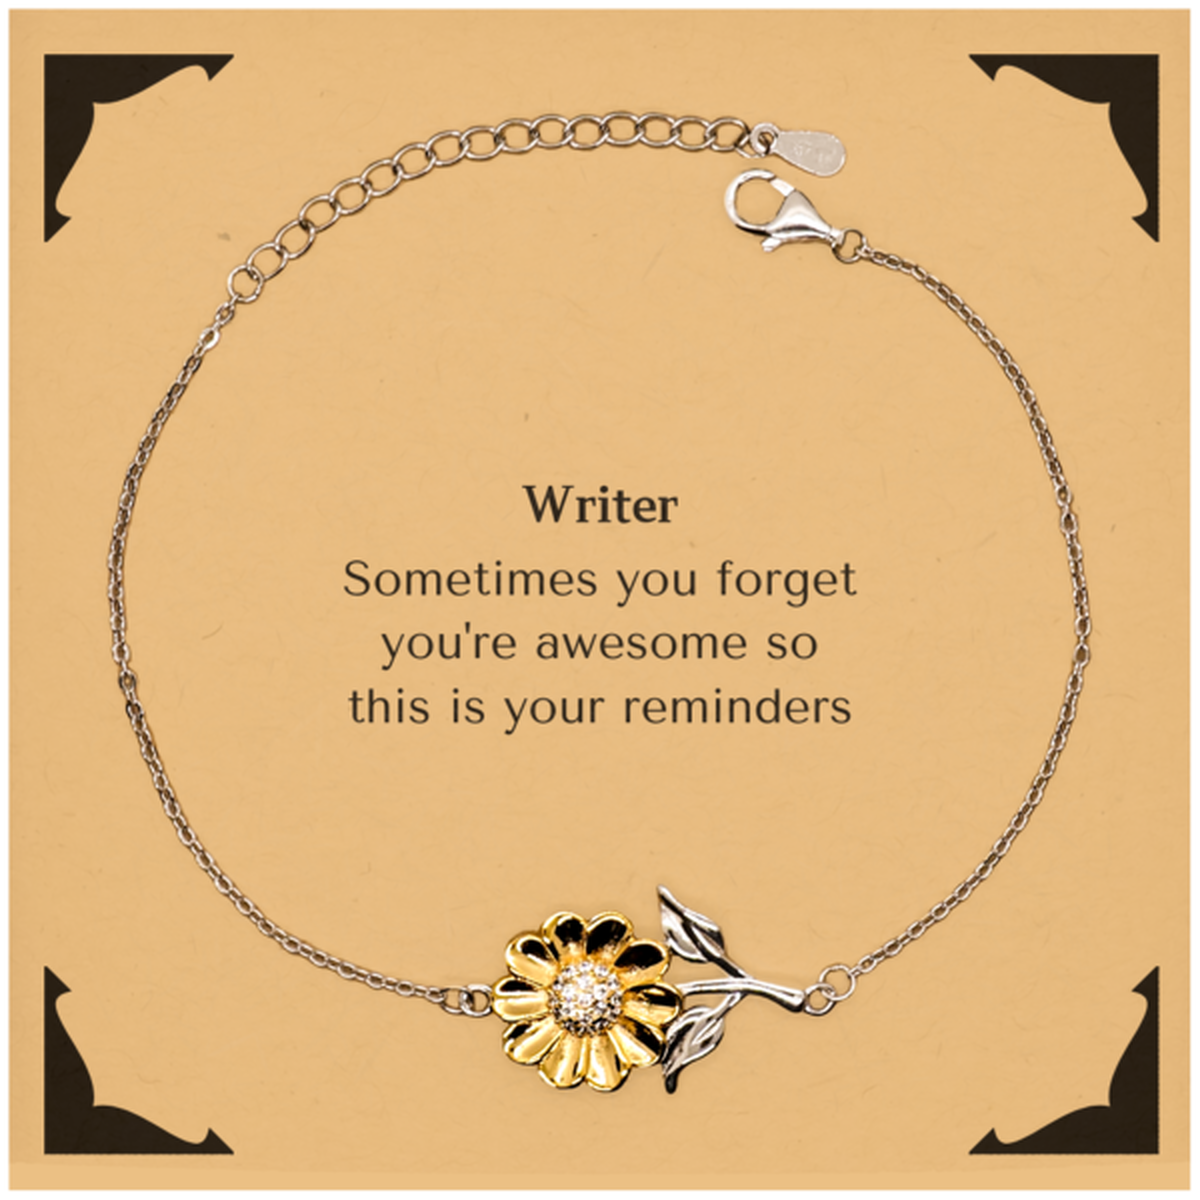 Sentimental Writer Sunflower Bracelet, Writer Sometimes you forget you're awesome so this is your reminders, Graduation Christmas Birthday Gifts for Writer, Men, Women, Coworkers